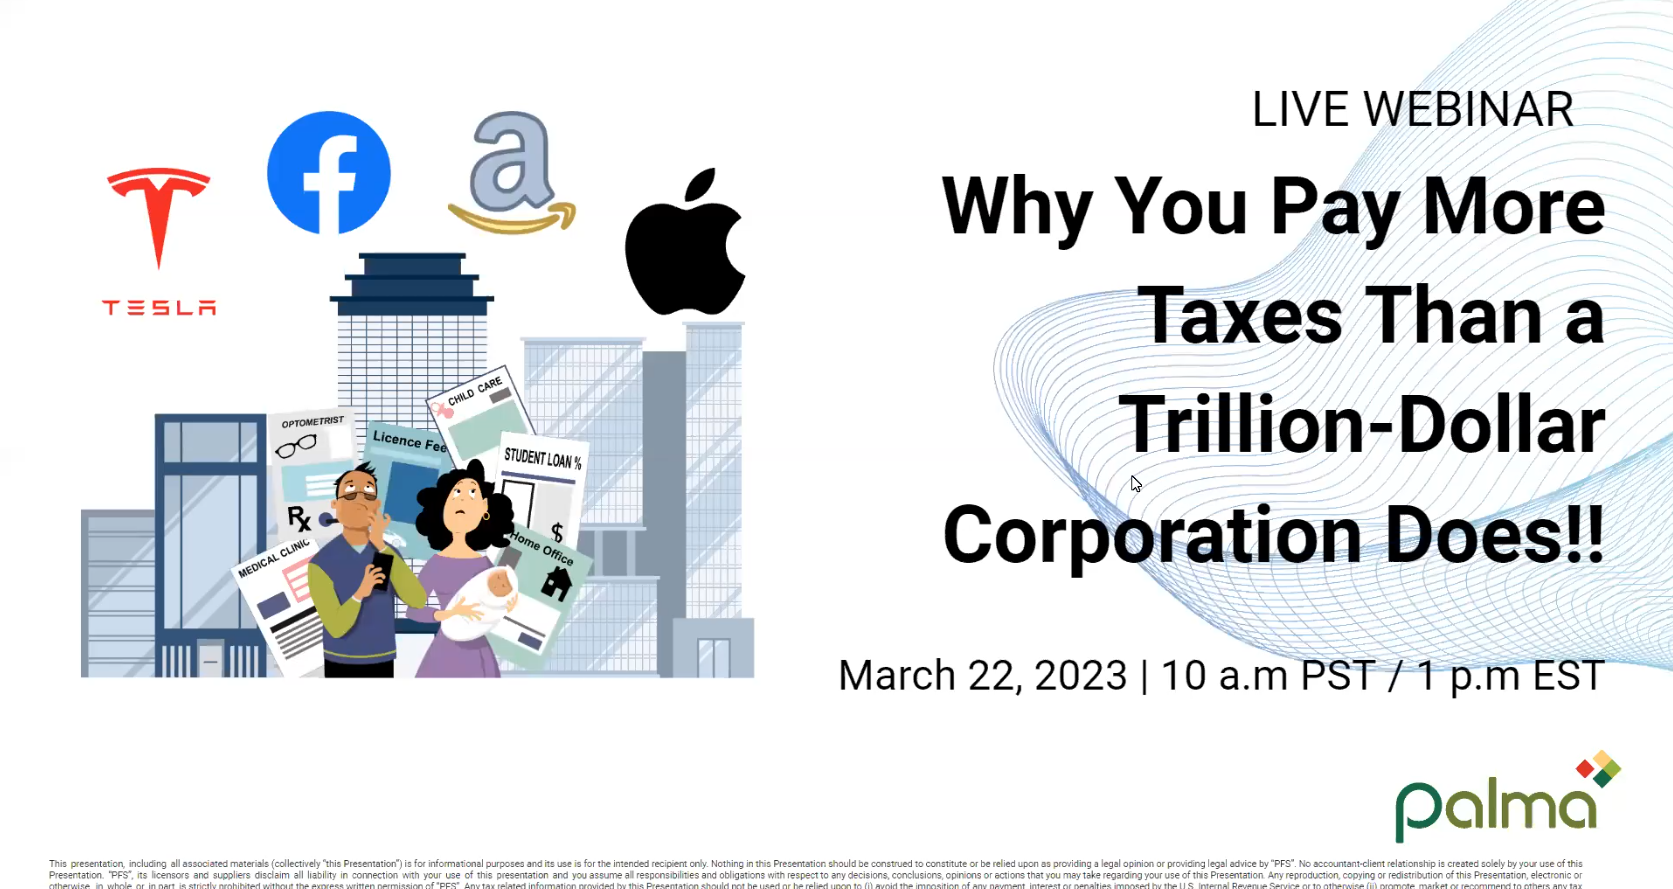 Why You Pay more Taxes Than a Trillion-Dollar Corporation Does